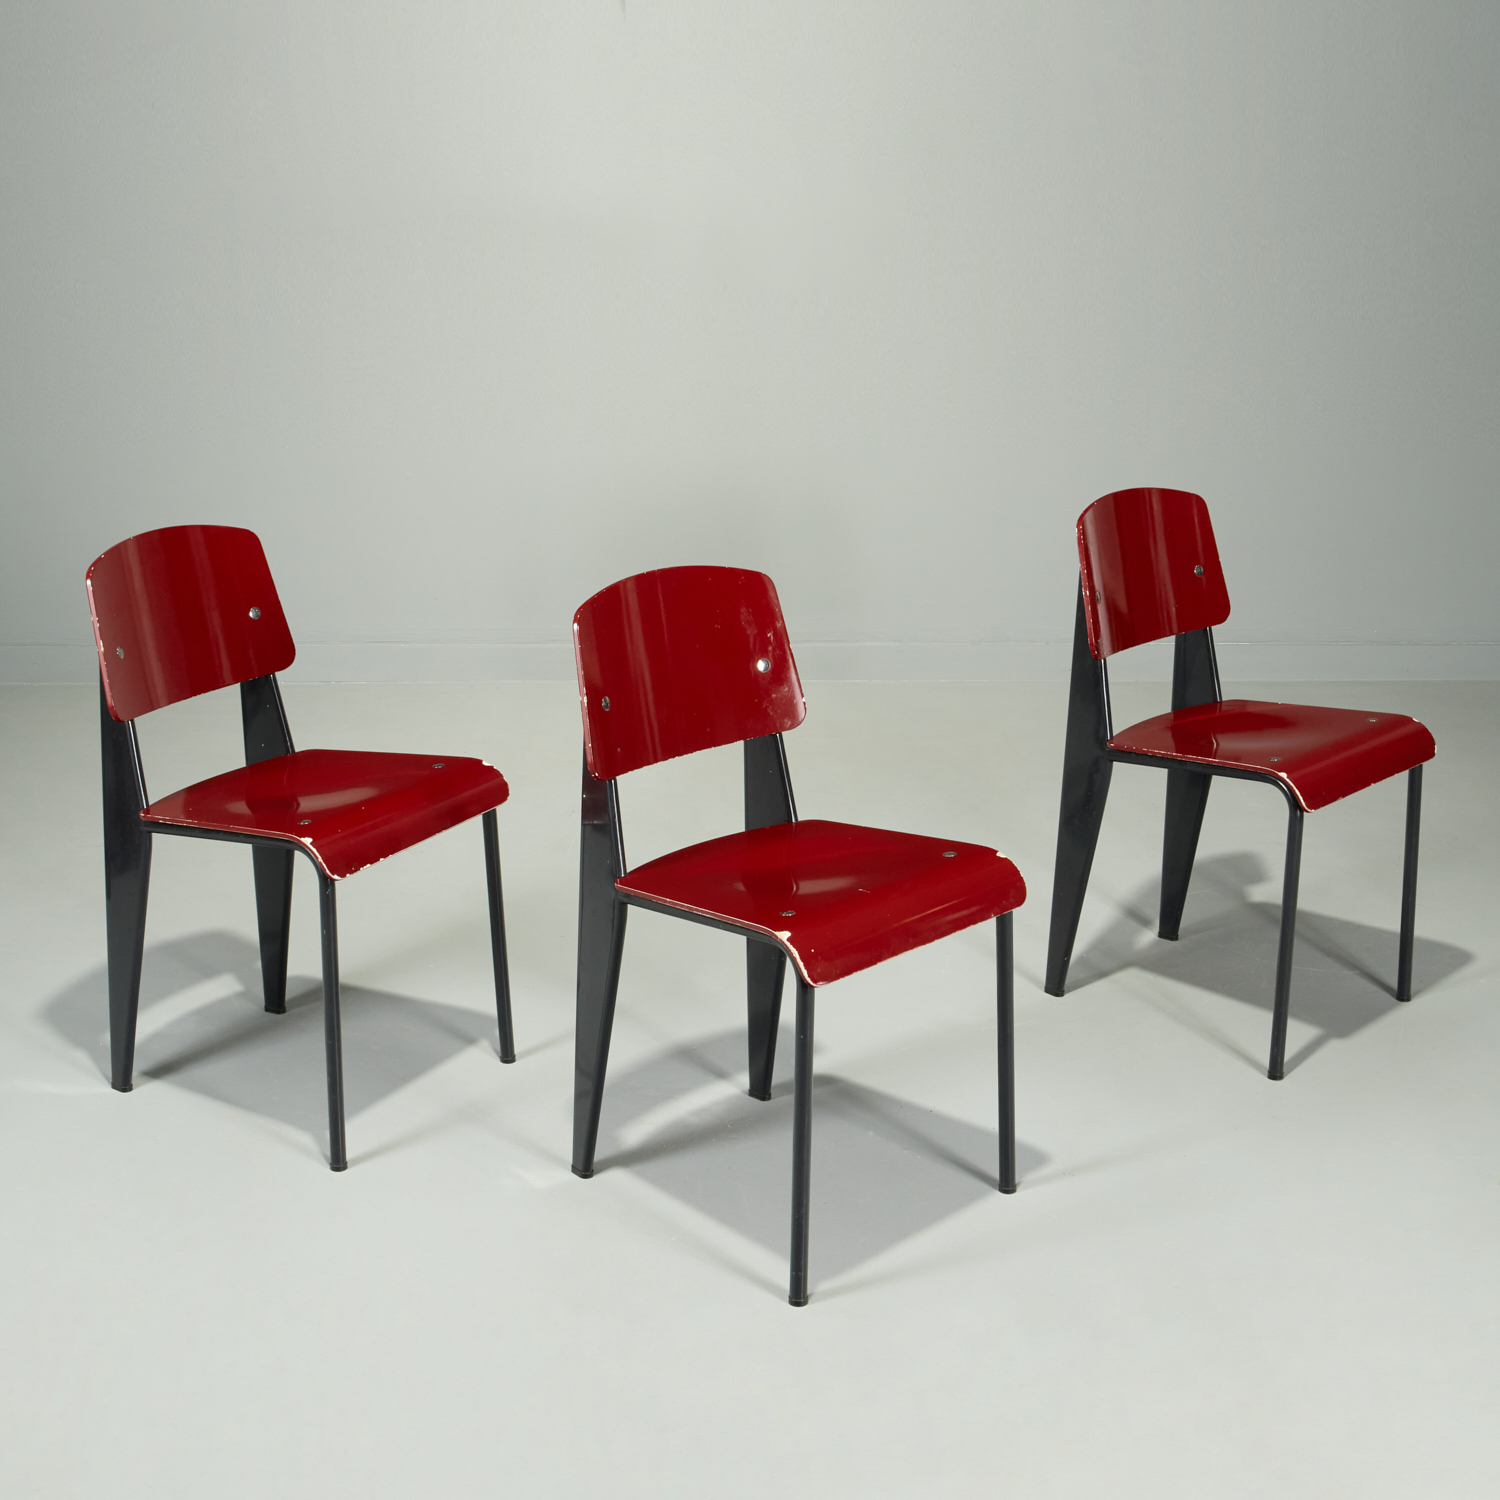 JEAN PROUVE 3 STANDARD CHAIRS 360cfe